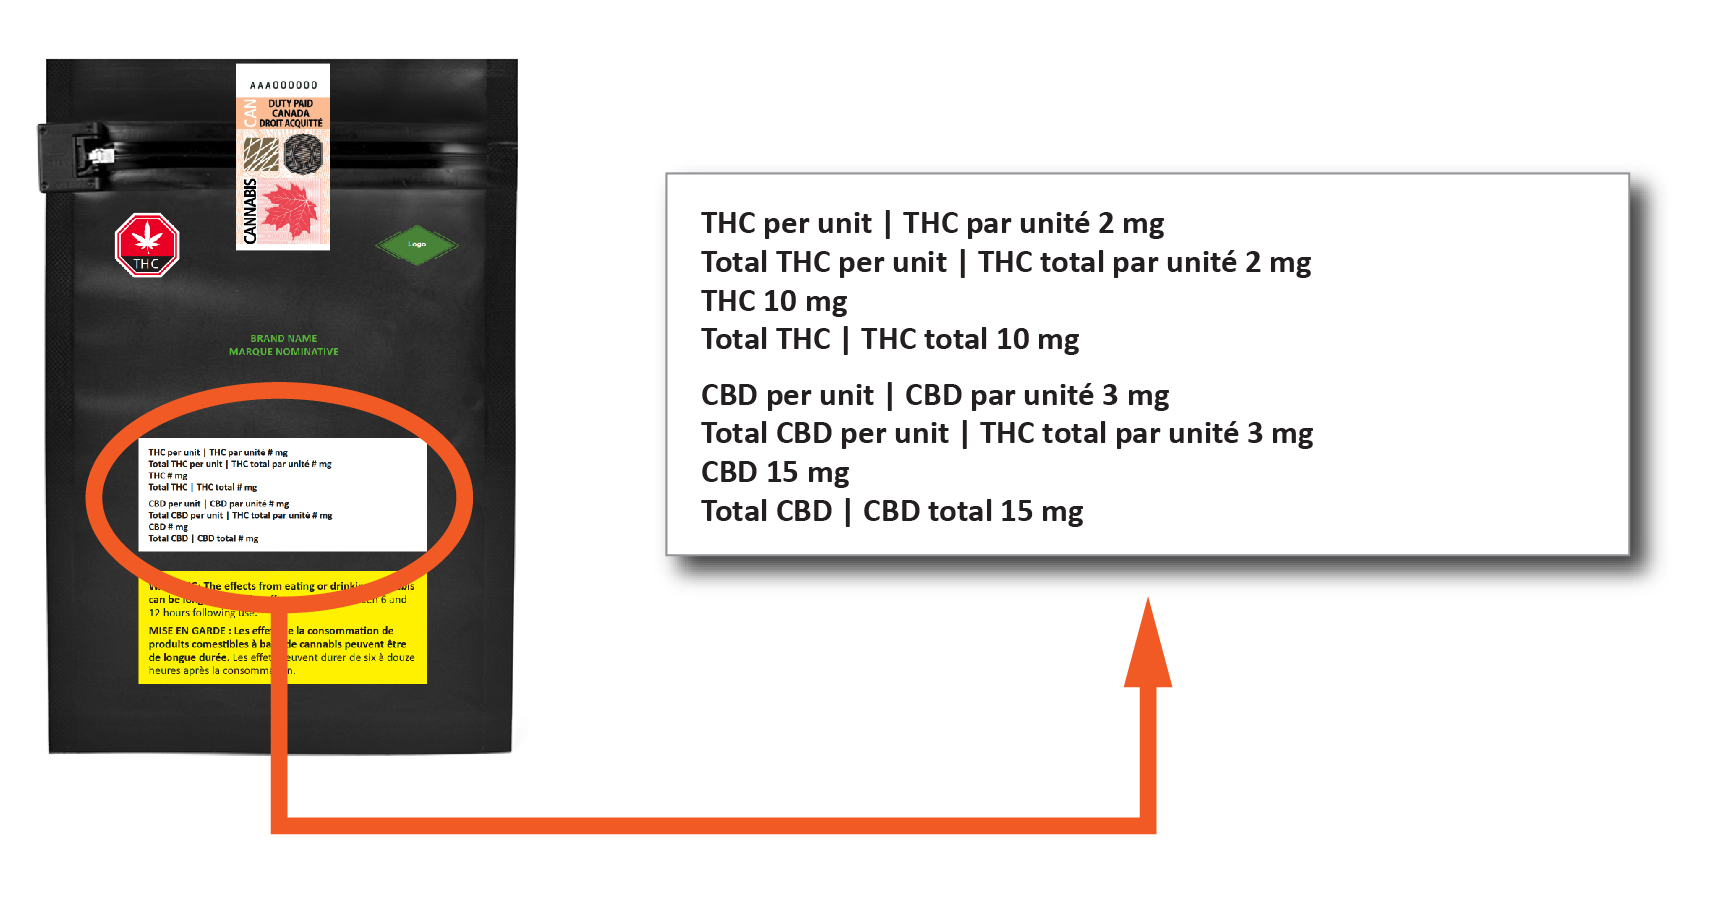 Example of a cannabis edible THC and CBD amount on a product packaging.